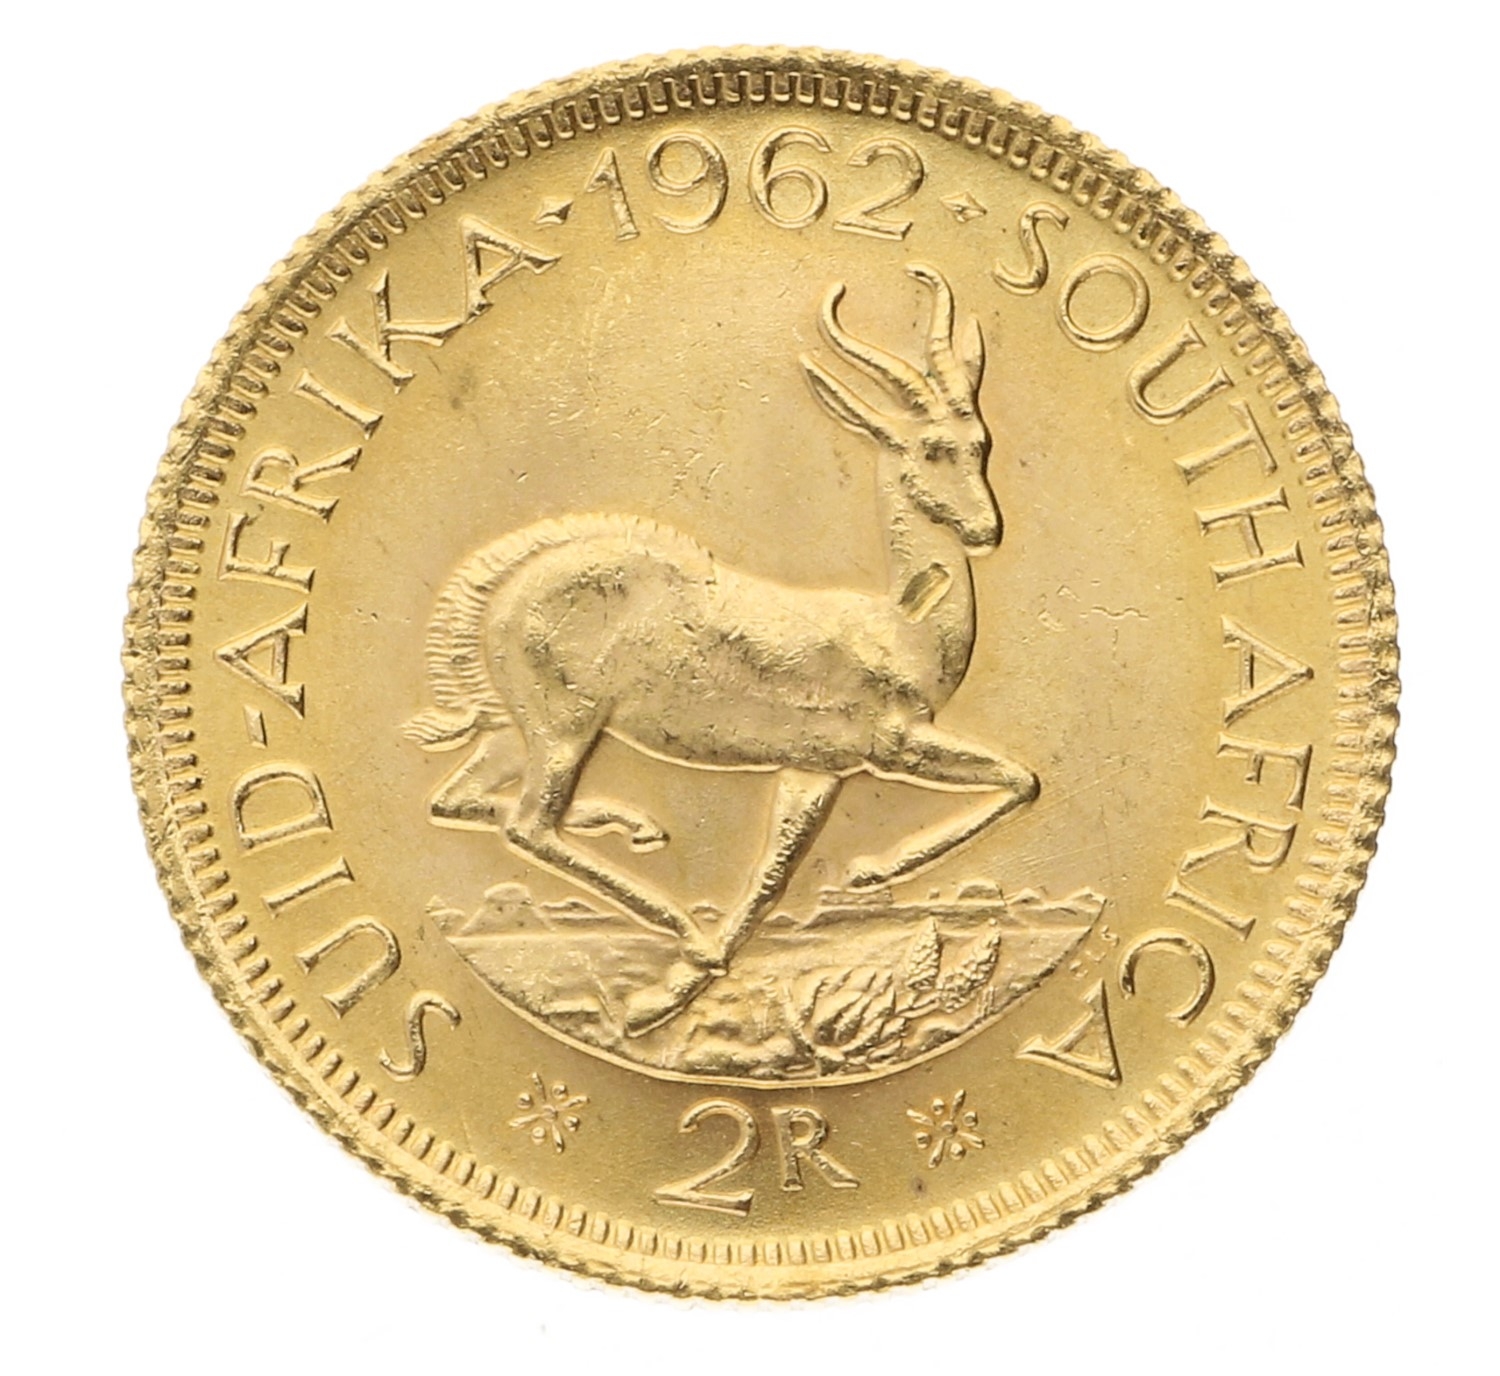 2 Rand - South Africa - 1962